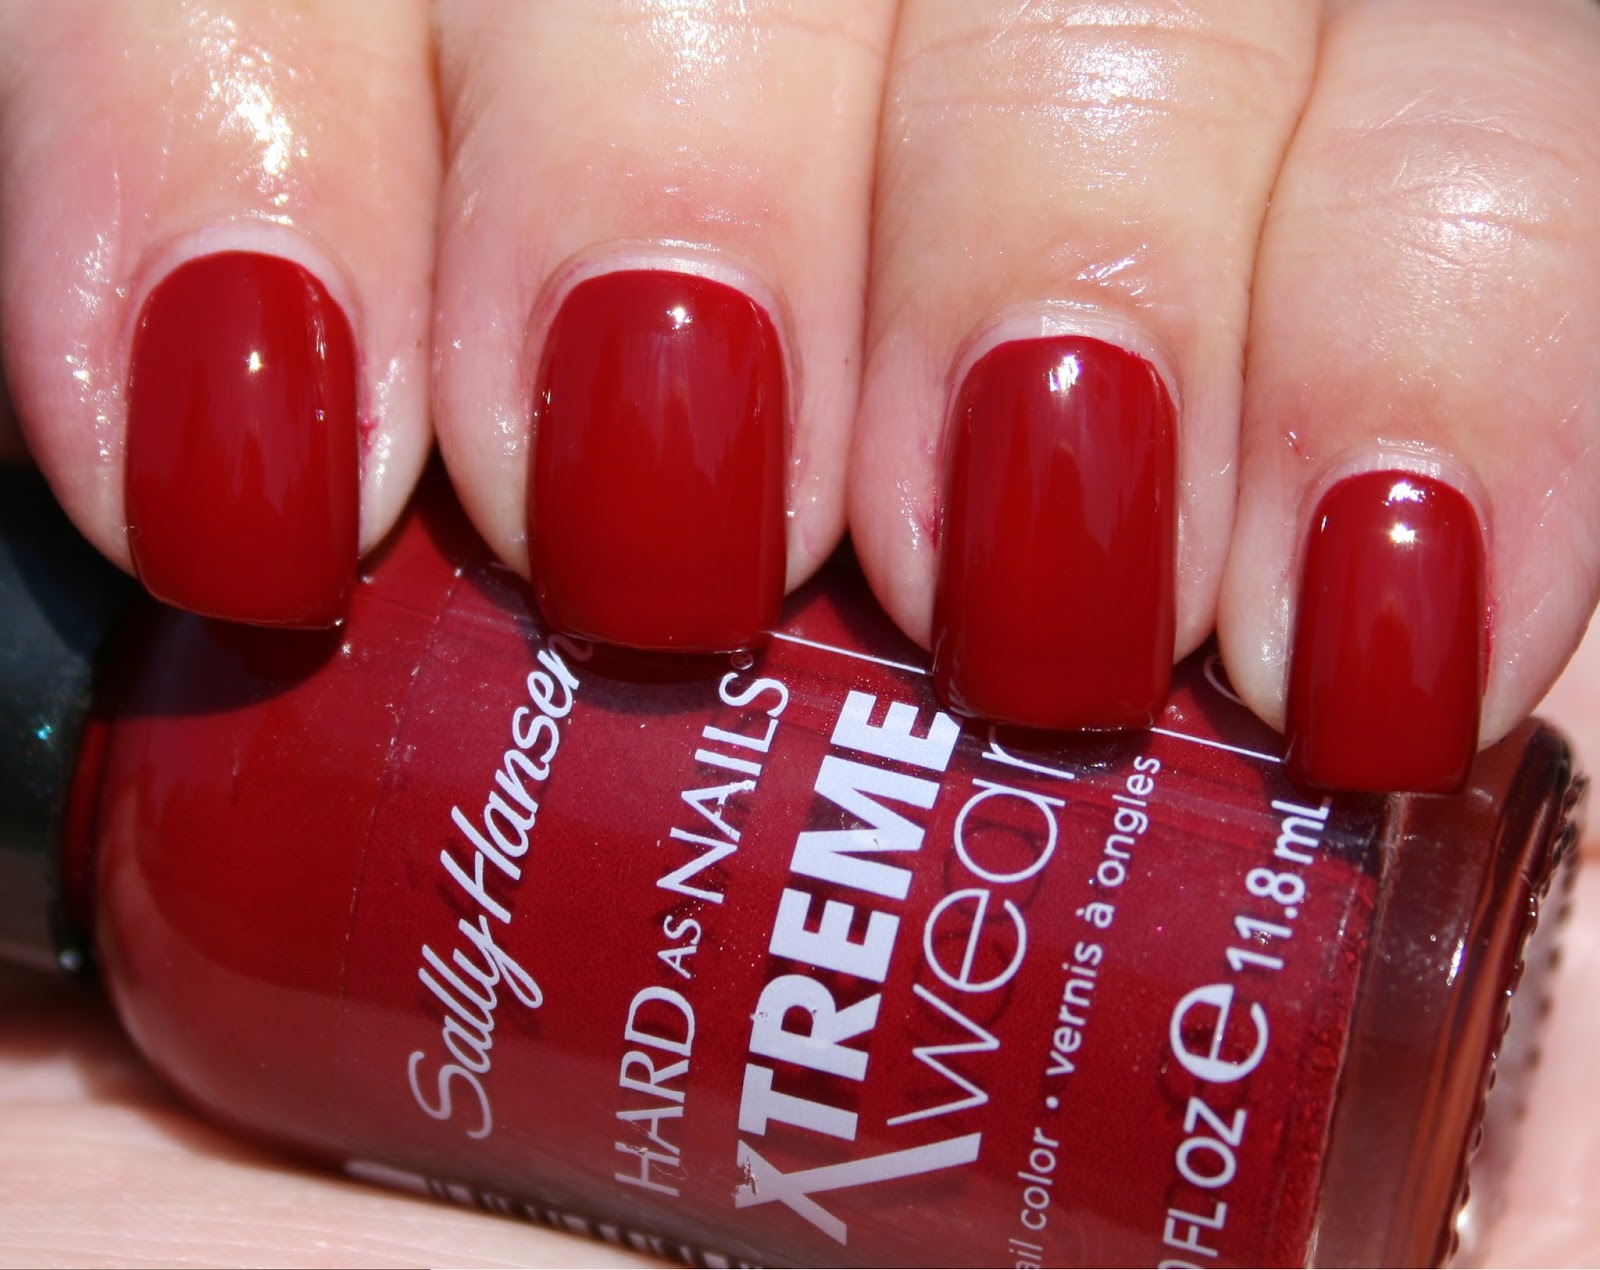 Sally Hansen Hard as Nails Xtreme Wear in "Canyon Sunset" - wide 3